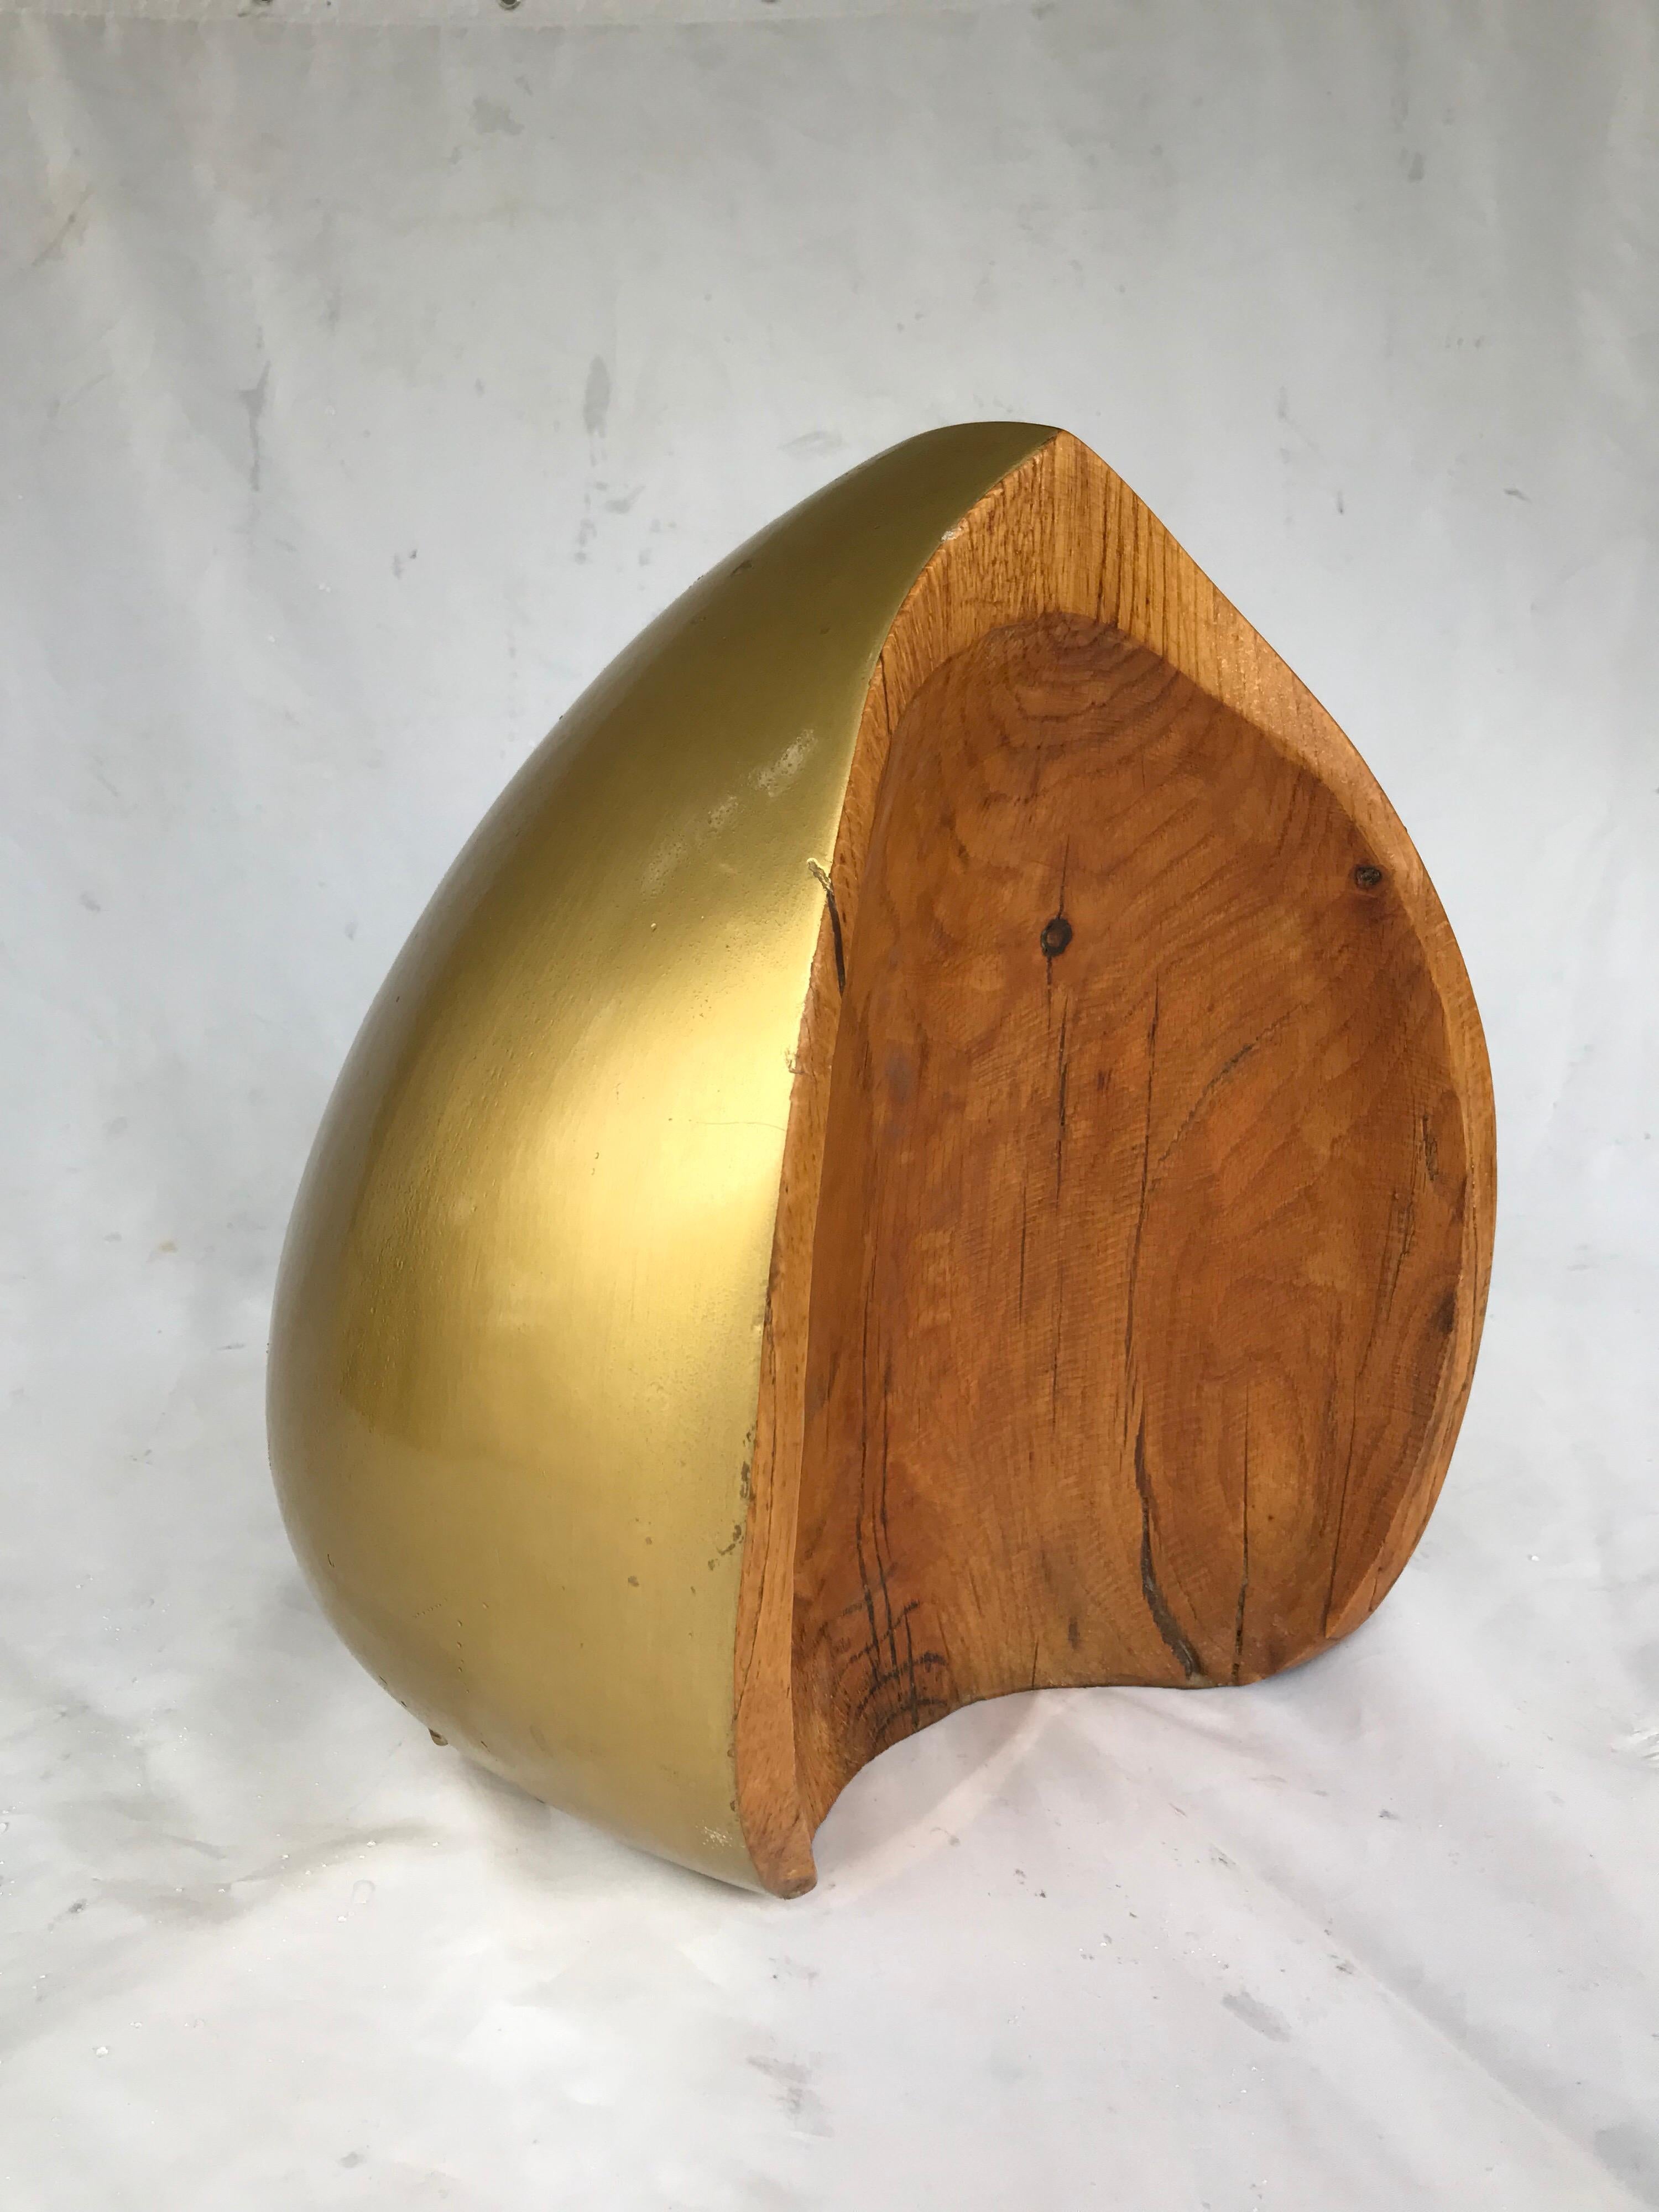 Modern Studio Crafted Heart Shaped Sculpture in the Noguchi Taste For Sale